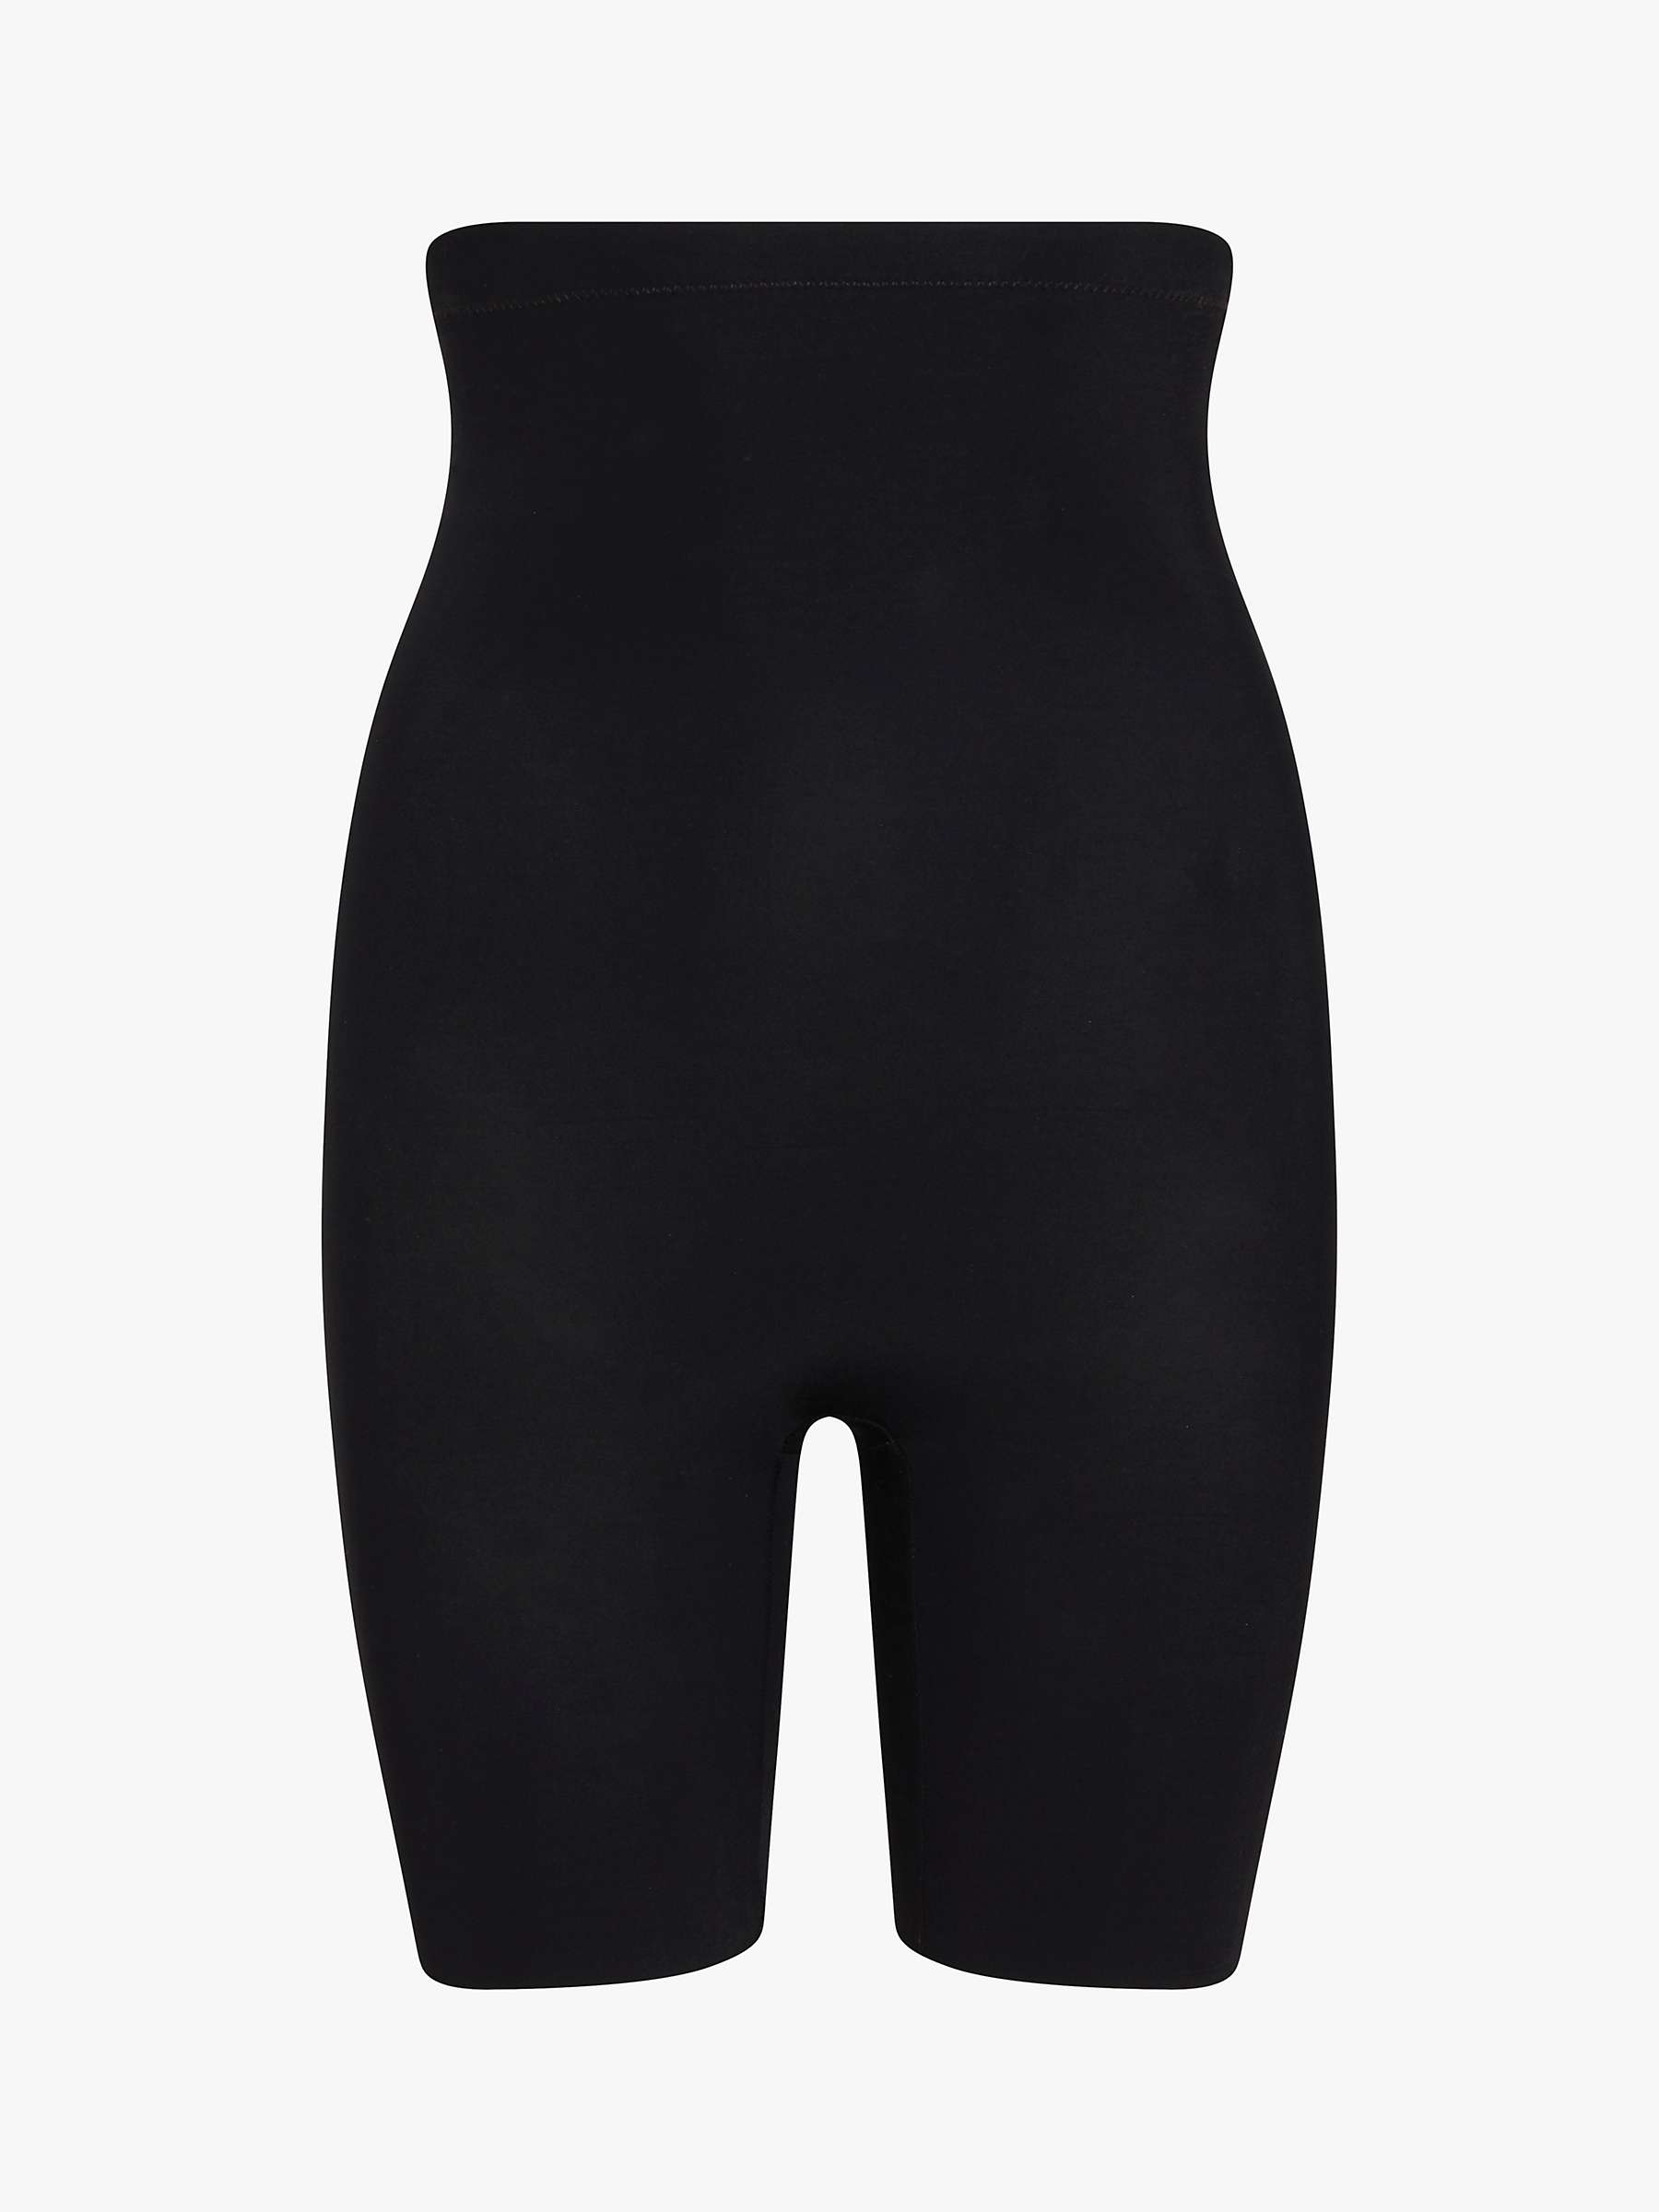 Buy Commando Classic Seamless Control High-Waisted Shorts Online at johnlewis.com